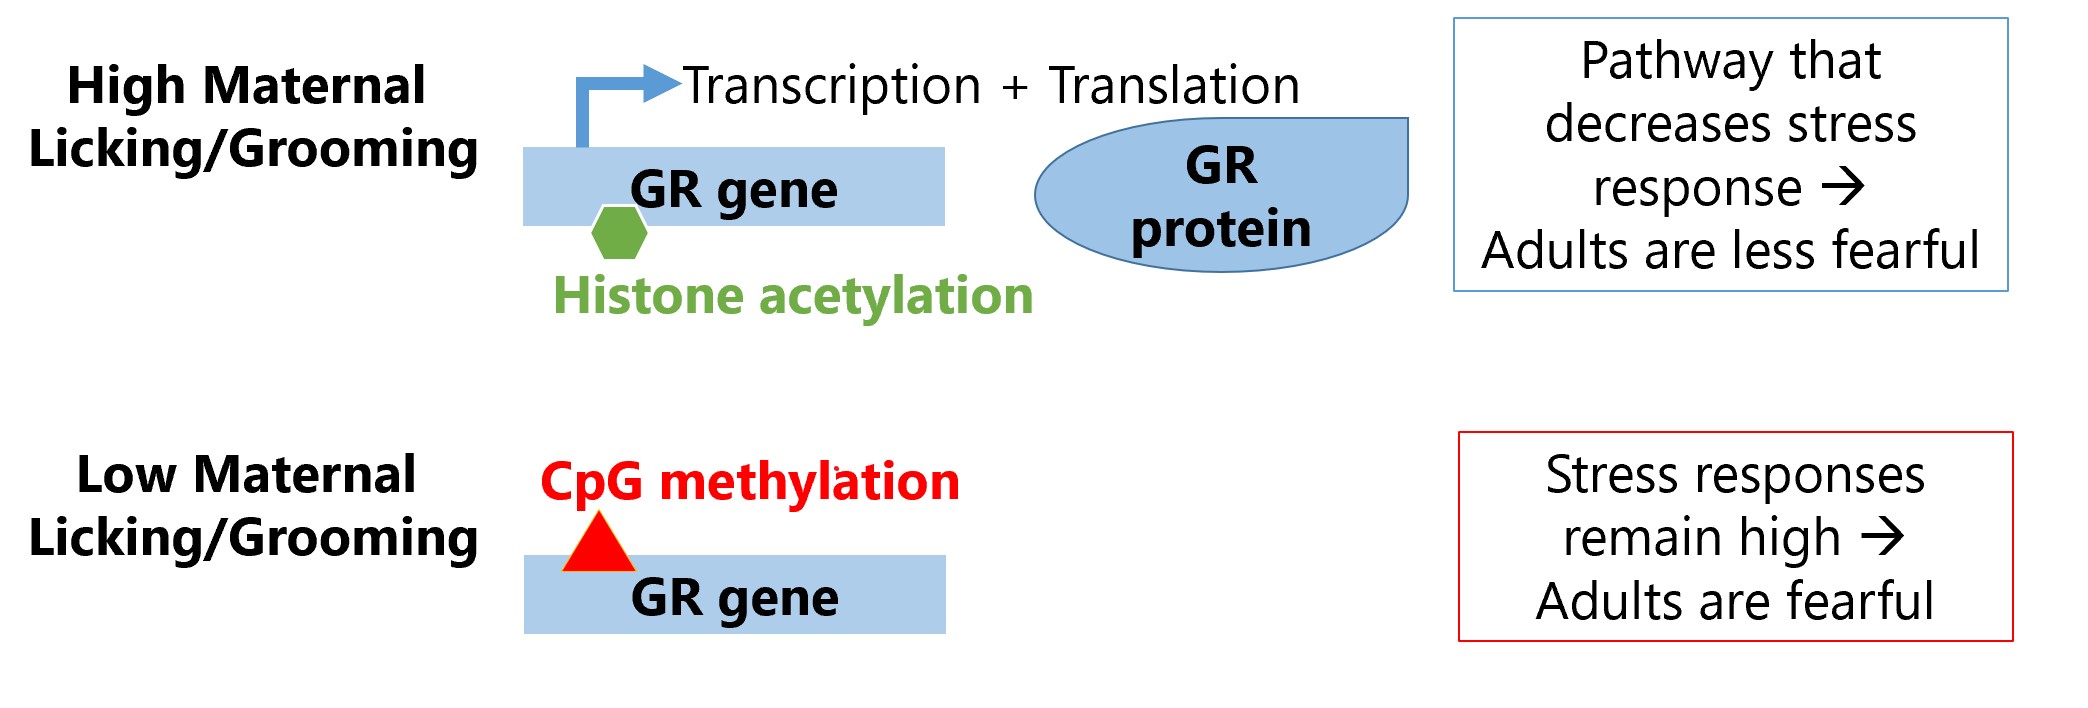 high maternal licking / grooming and acetylation of G R gene produces G R protein. Results in less fearful adults.